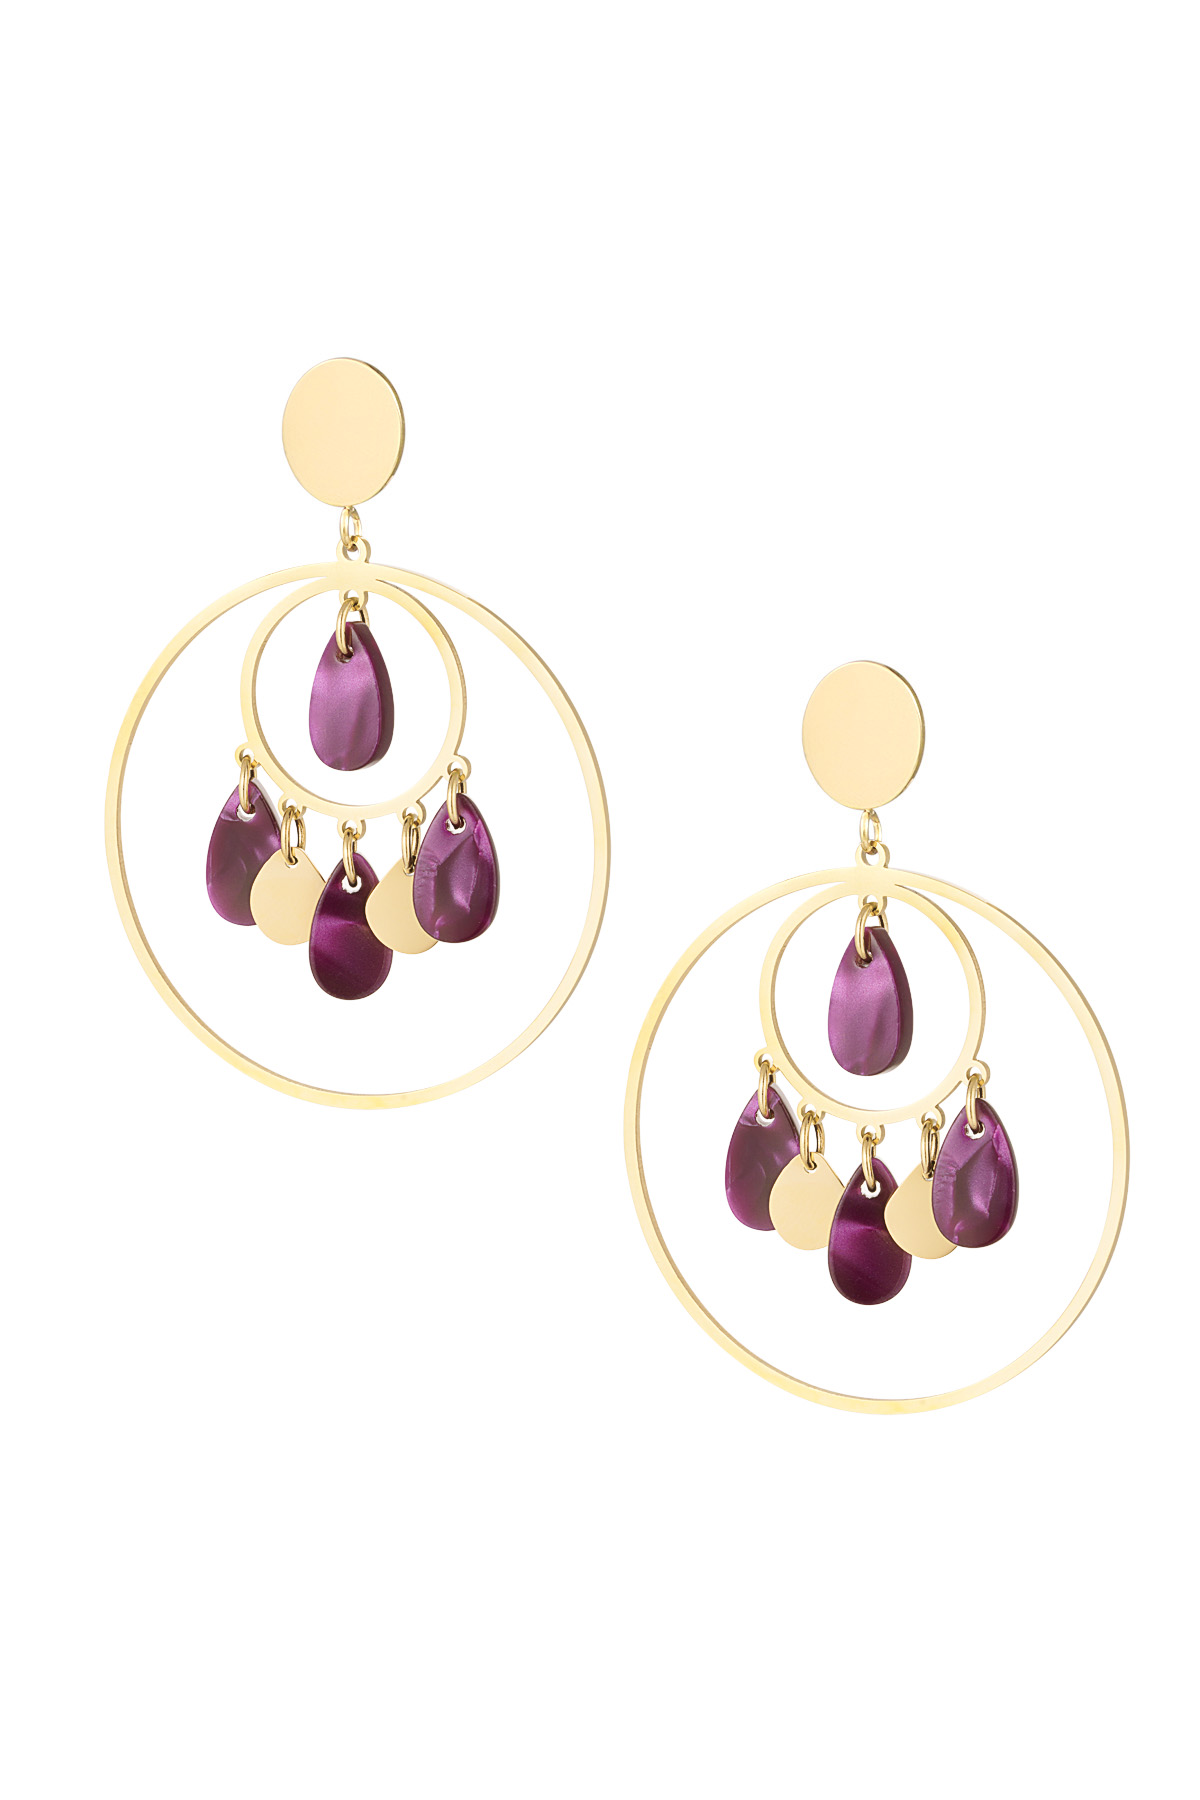 Earrings circles with coins - gold/purple